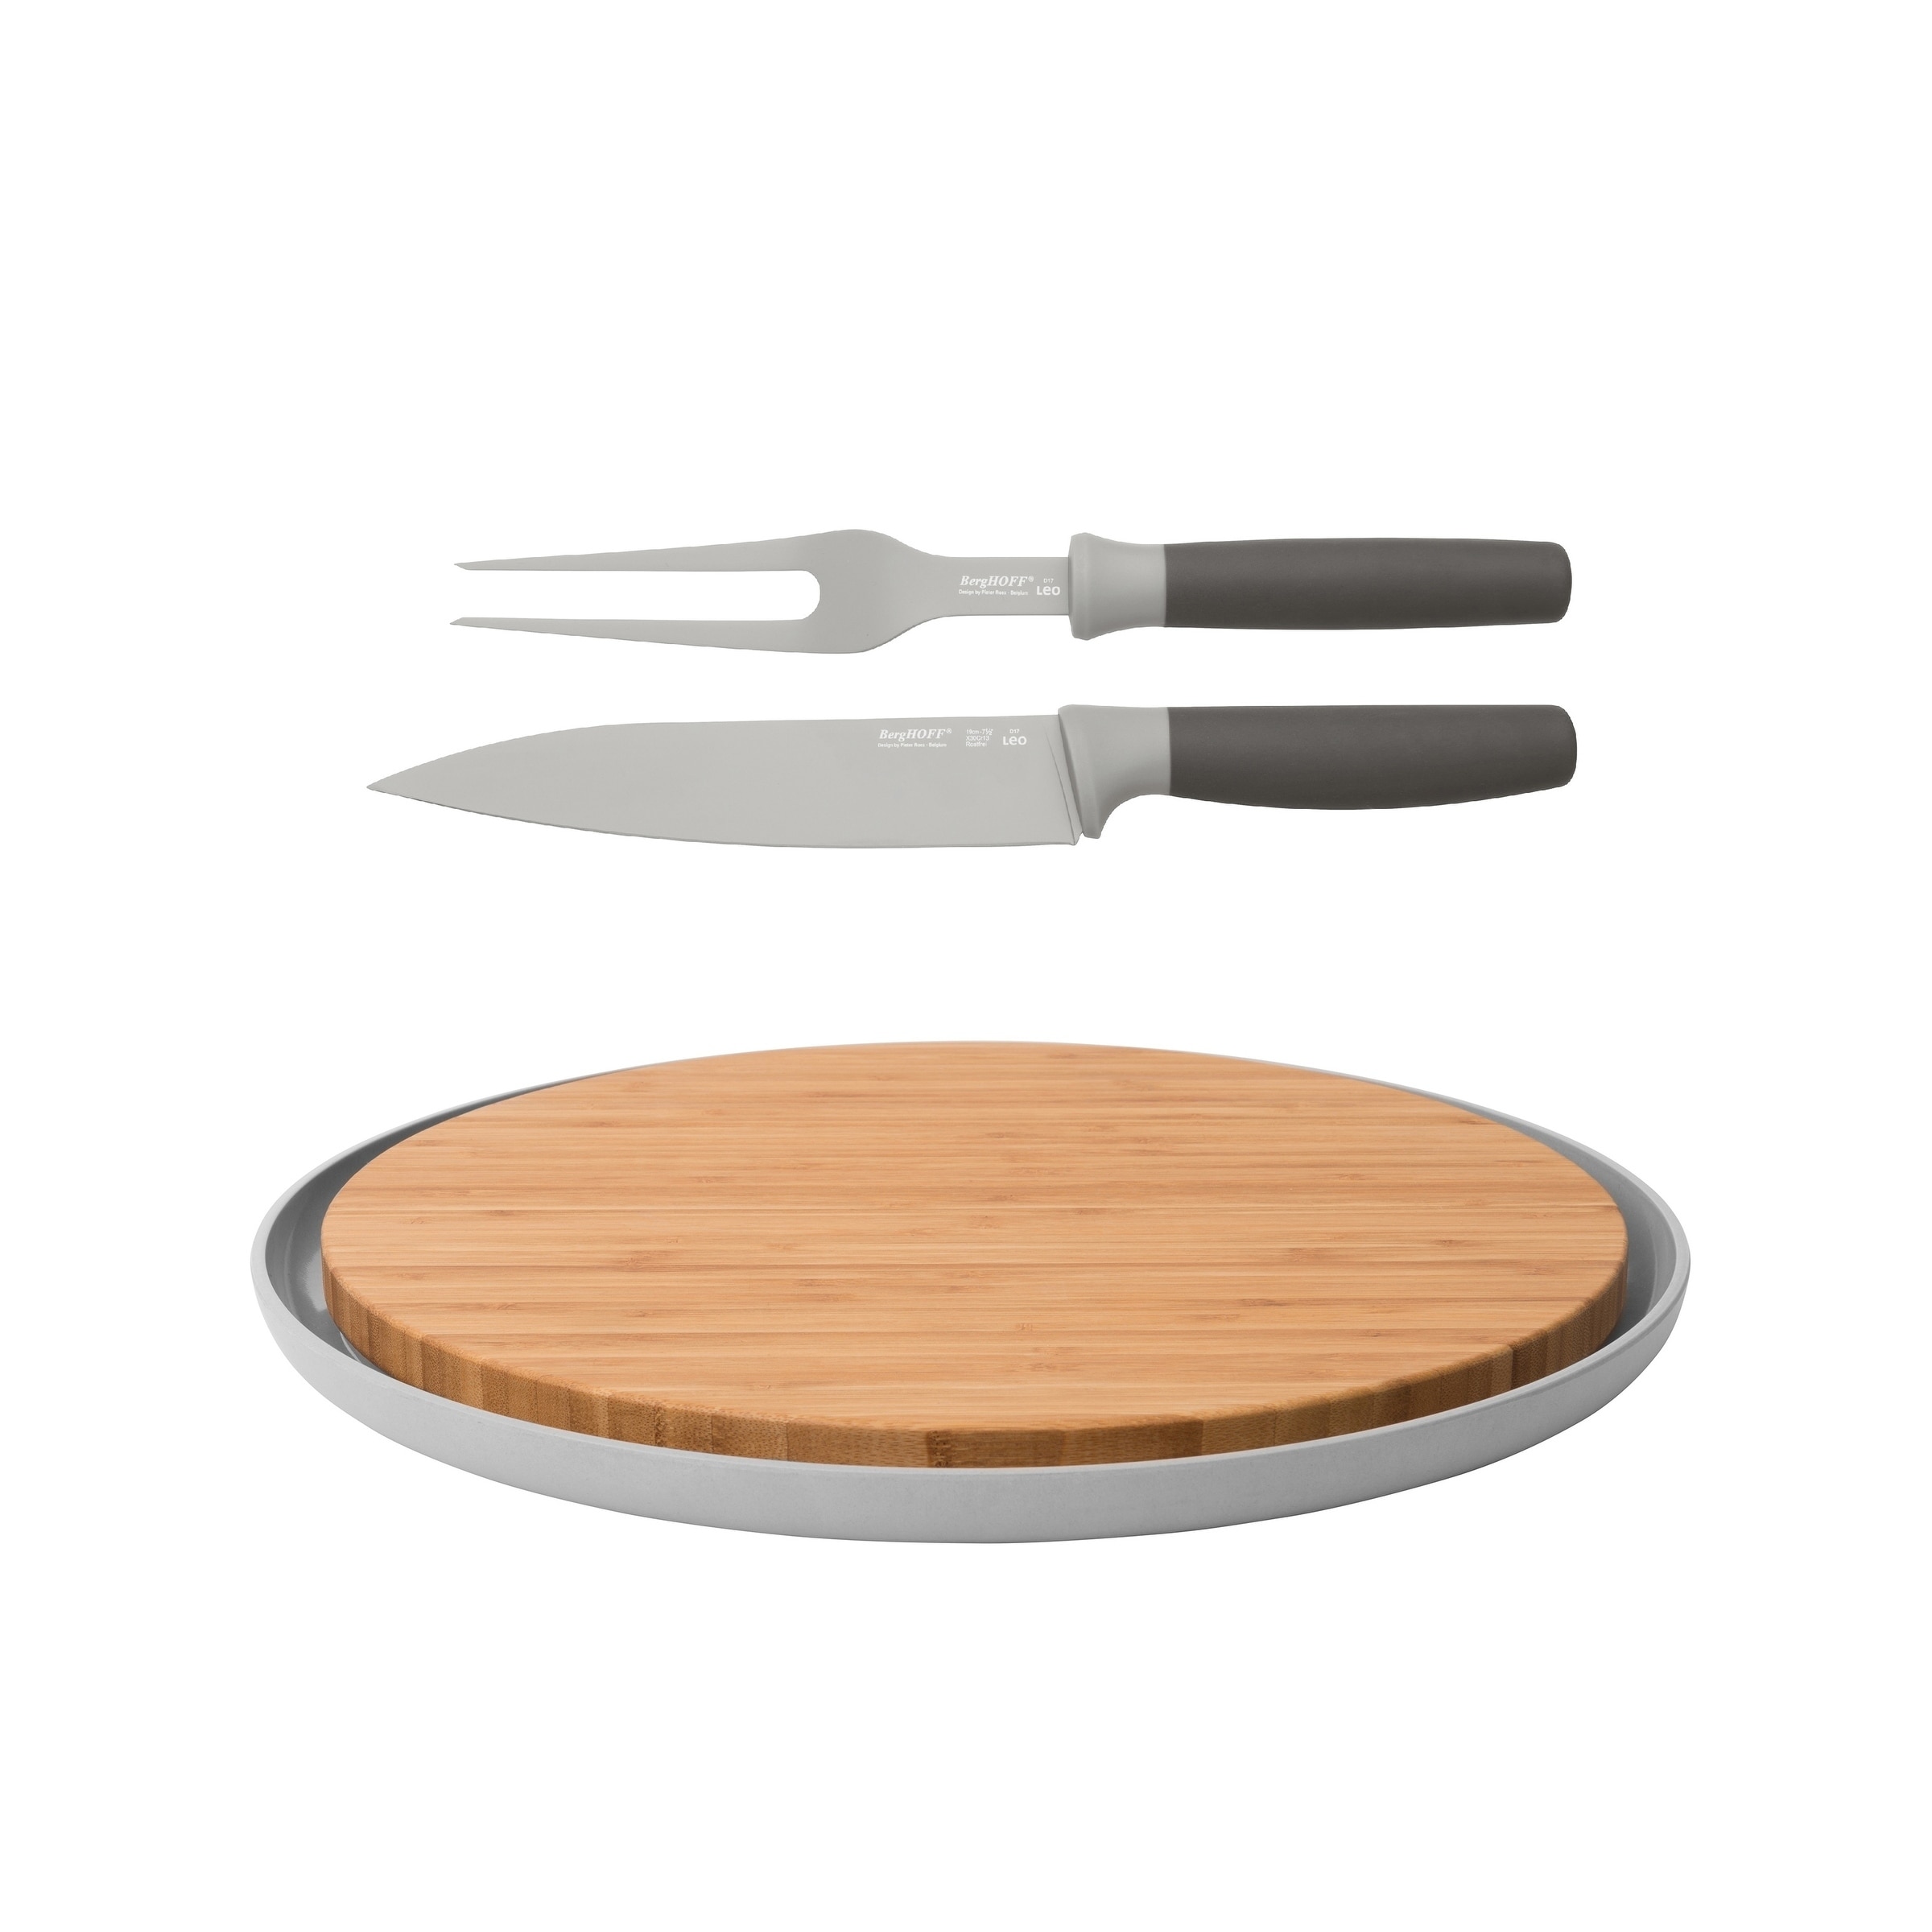 https://ak1.ostkcdn.com/images/products/30502587/Leo-3pc-Carving-and-Cutting-Board-Set-b424803d-9e0e-4bd6-b77a-363d9a04c323.jpg